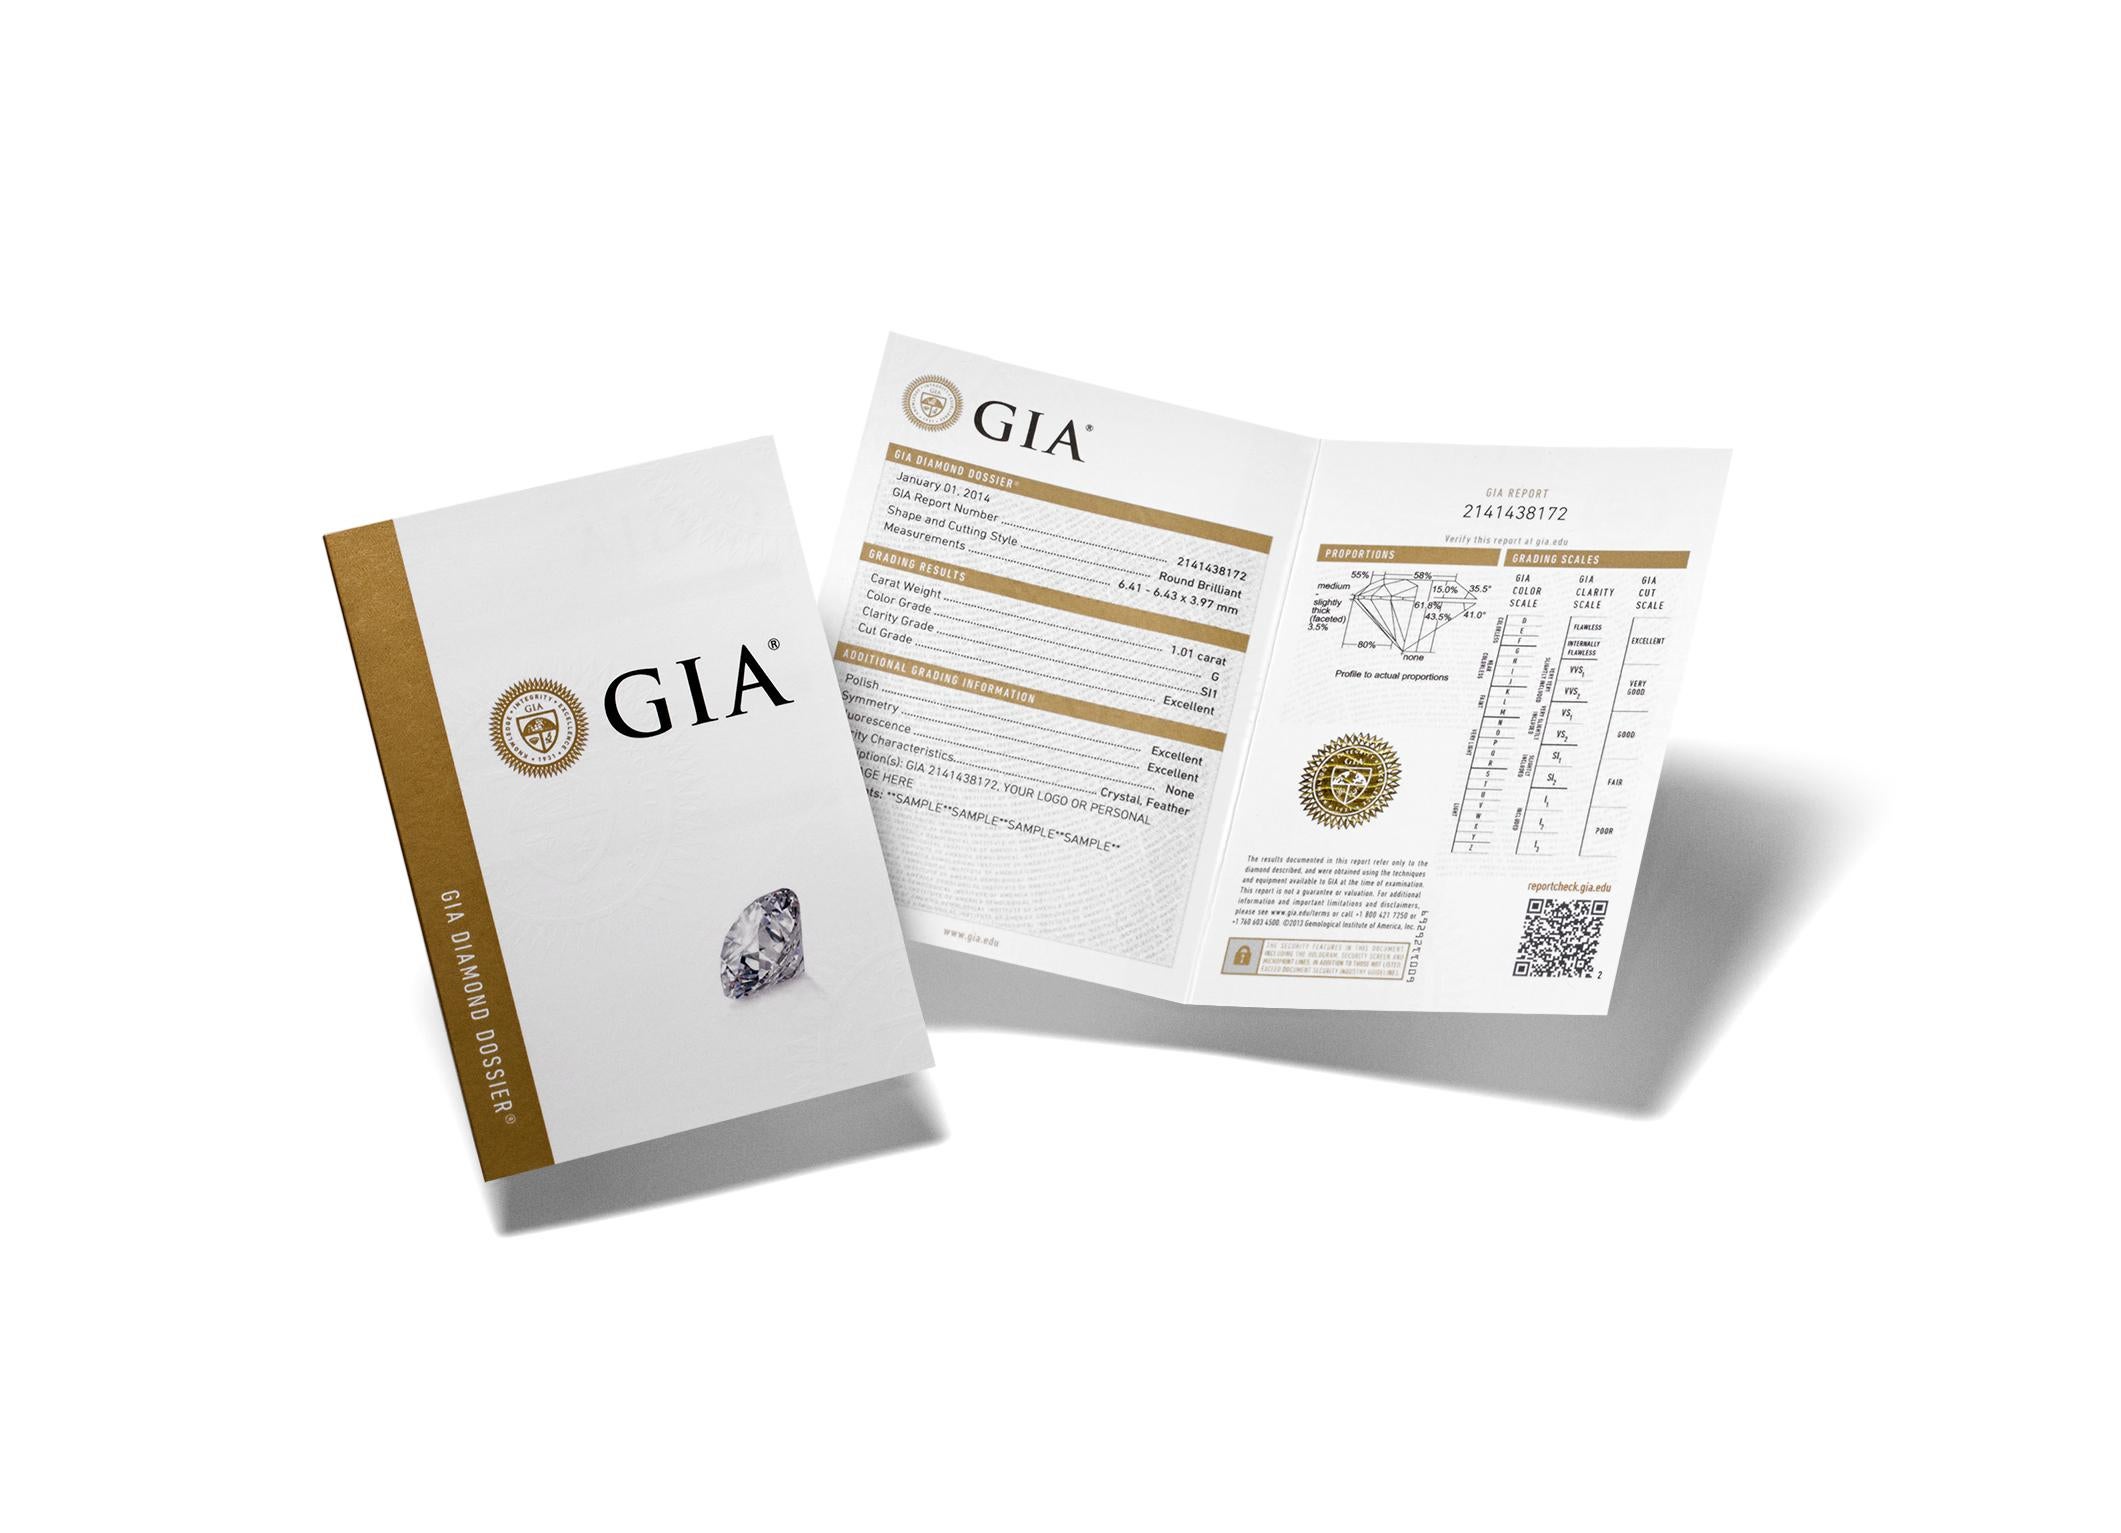 GIA Certified 0.50 Carat, F/VVS2, Brilliant Cut, Excellent Natural Diamond

Perfect Brilliants for perfect gifts.

5 C's:

Certificate: GIA
Carat: 0.50ct
Color: F
Clarity: VVS2(Very Very Slightly Included)
Cut: Excellent

Polish: Excellent
Symmetry: